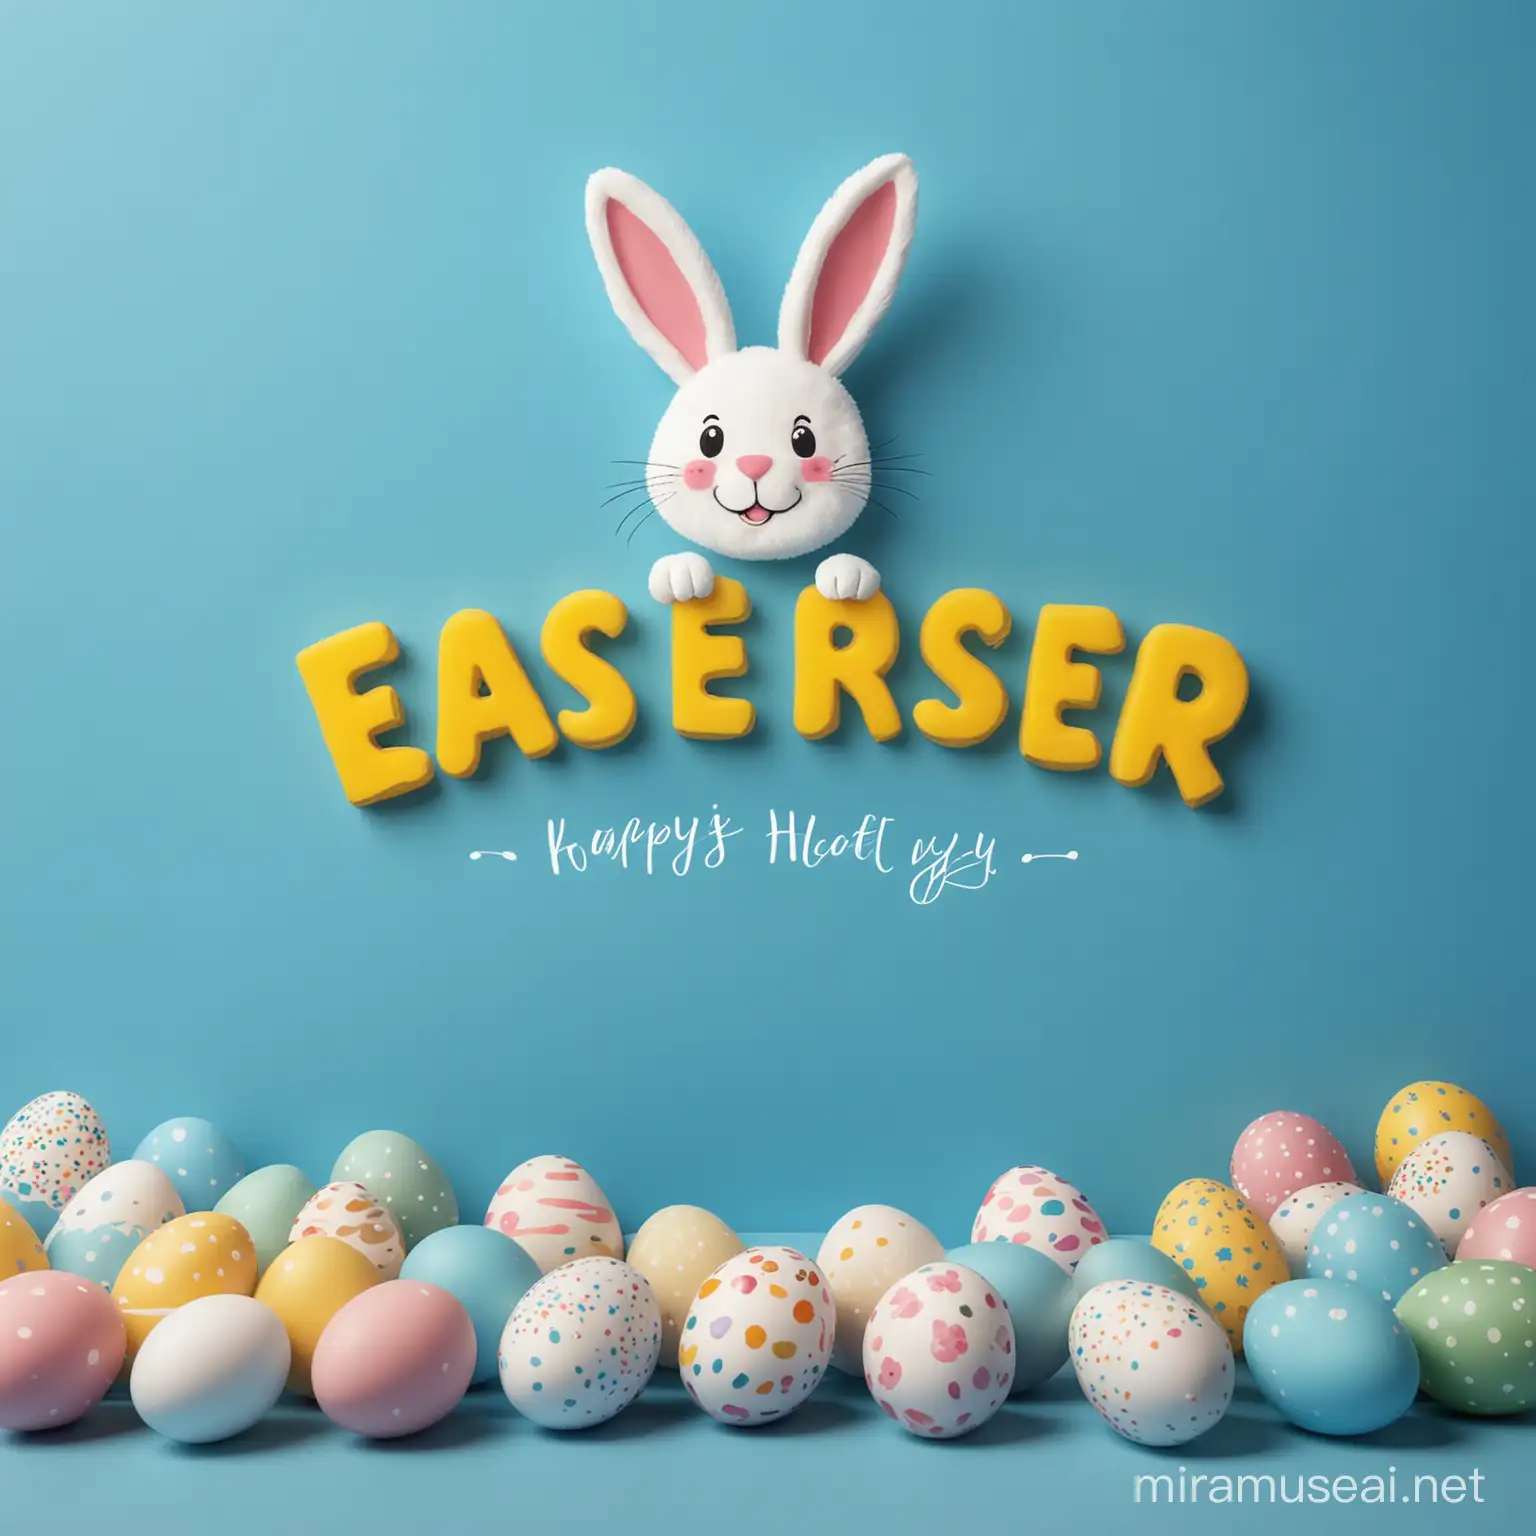 Happy Easter kids's day blue background
